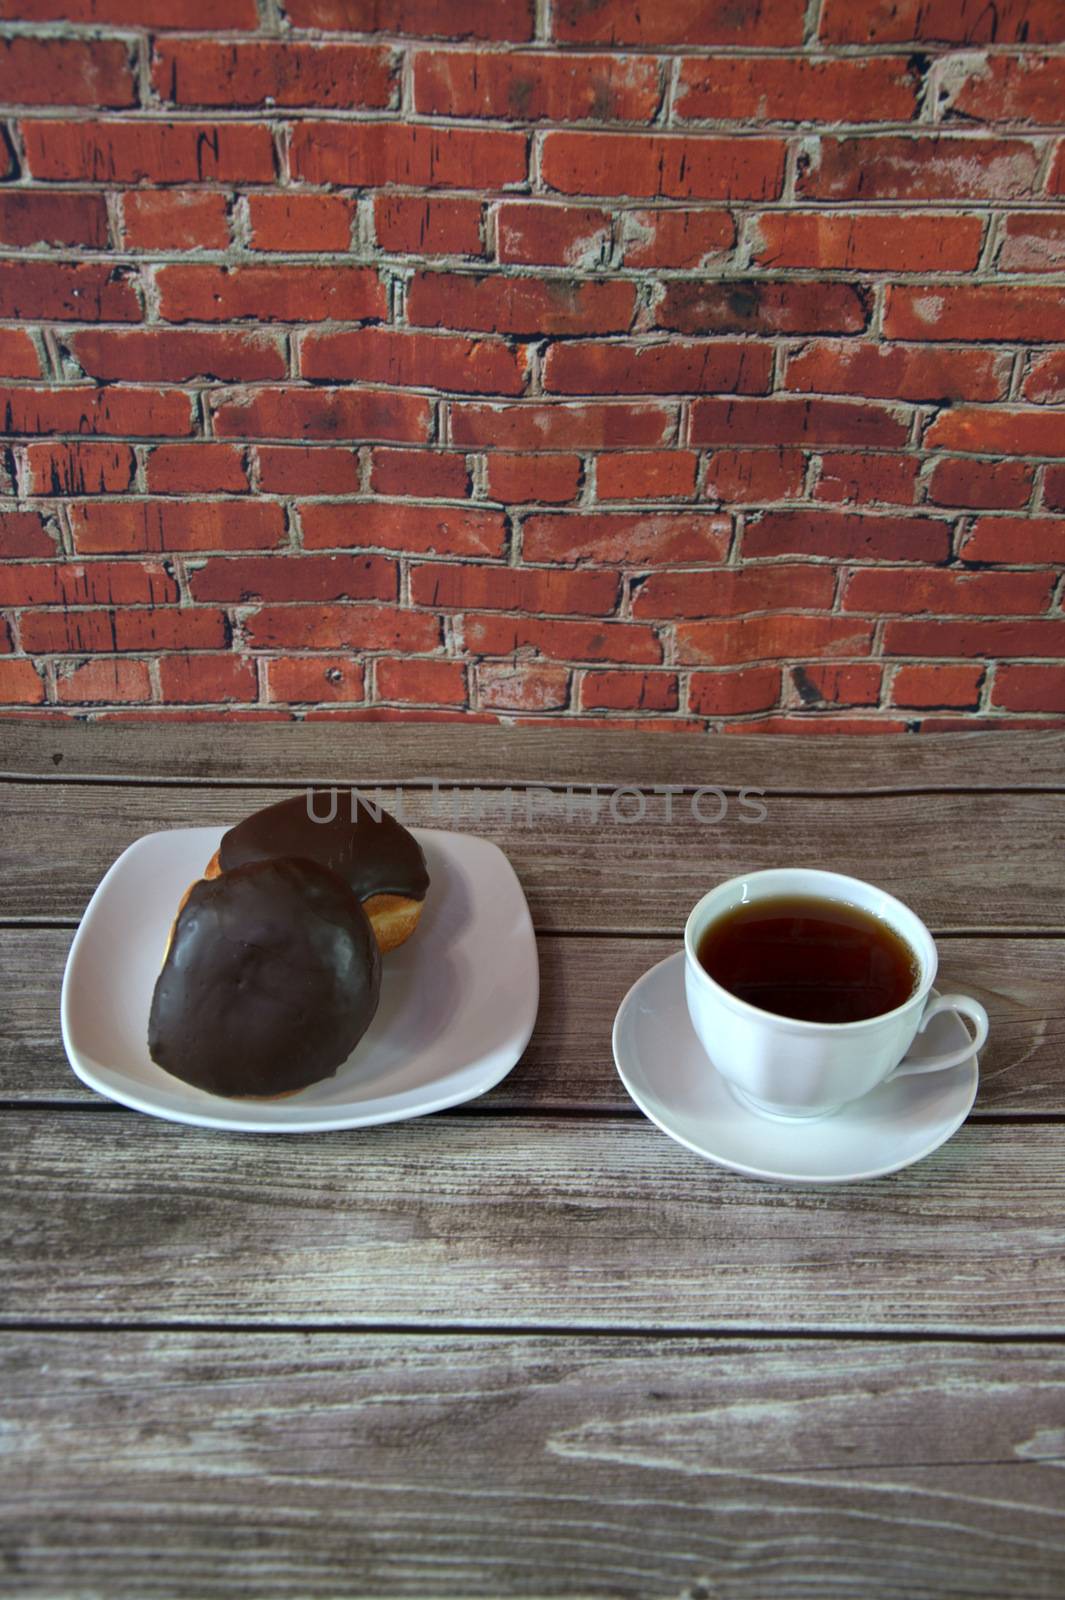 A cup of coffee and two donuts in a chocolate eye on a white ceramic plate. Close-up.